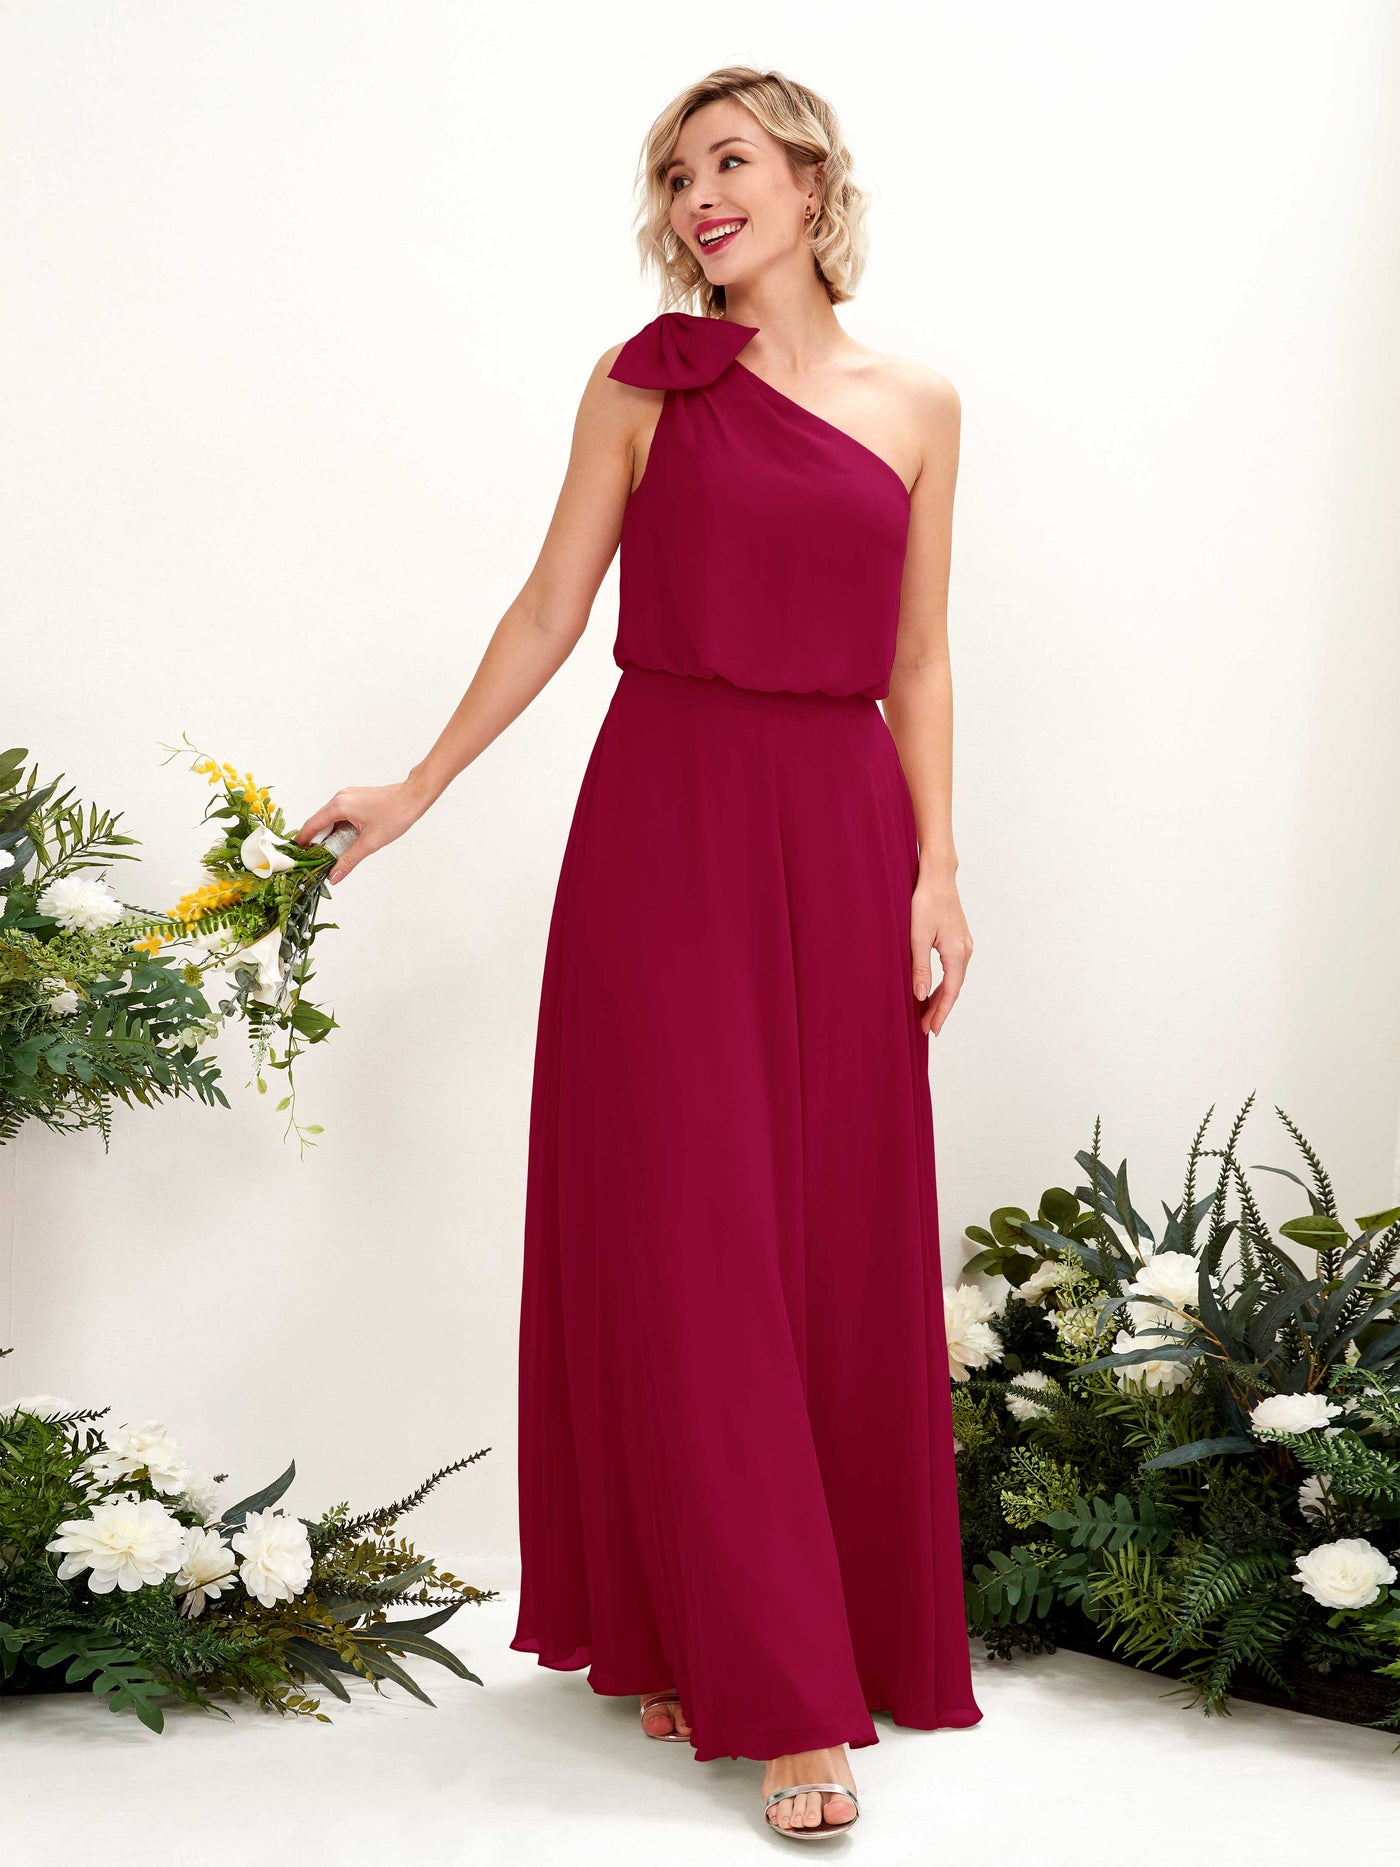 Jester Red Bridesmaid Dresses Bridesmaid Dress A-line Chiffon One Shoulder Full Length Sleeveless Wedding Party Dress (81225541)#color_jester-red